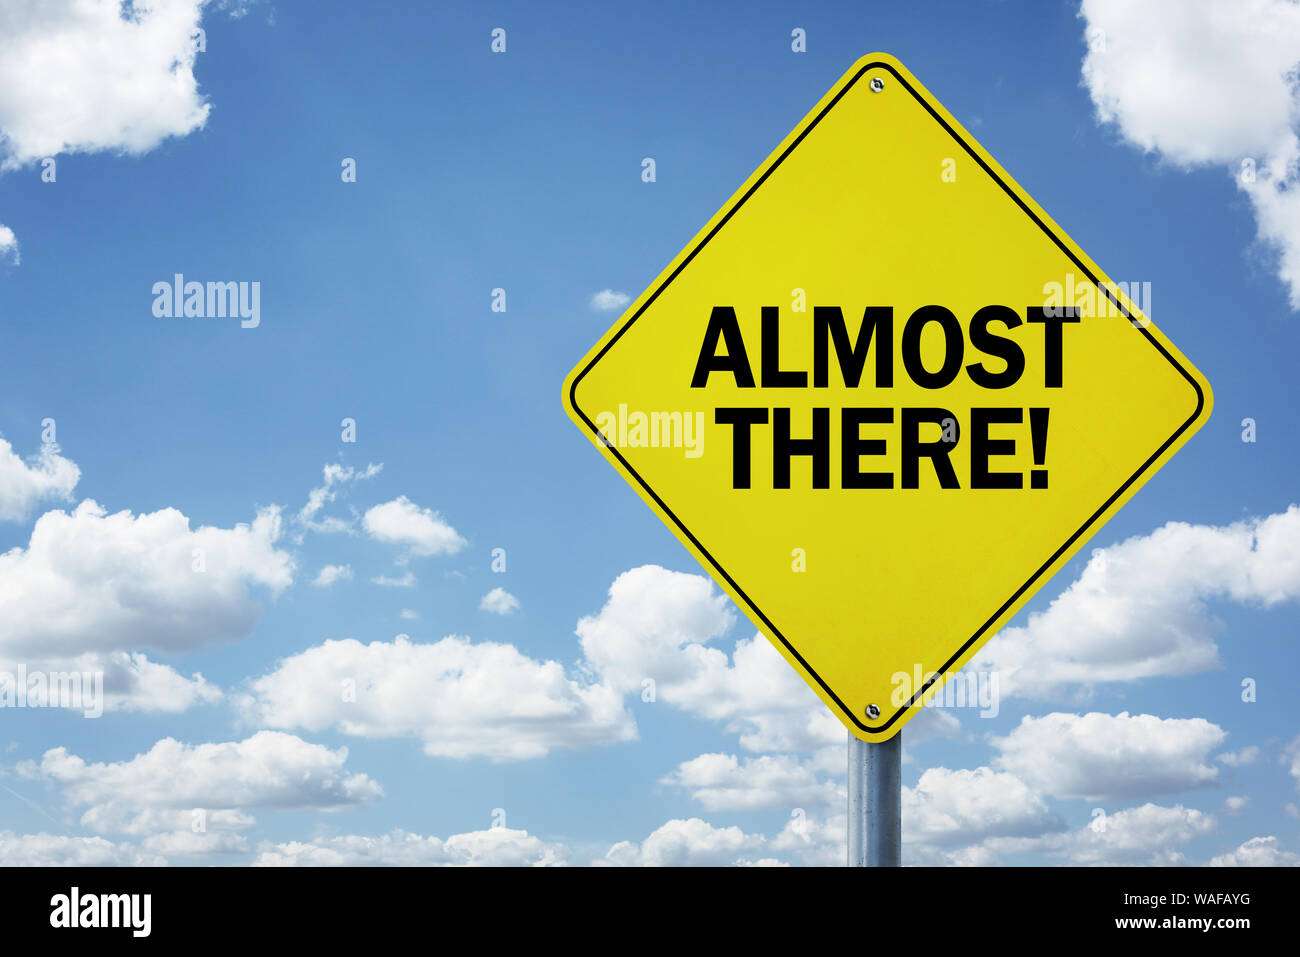 Almost there road sign concept for business motivation, encouragement and approaching a destination or goal Stock Photo